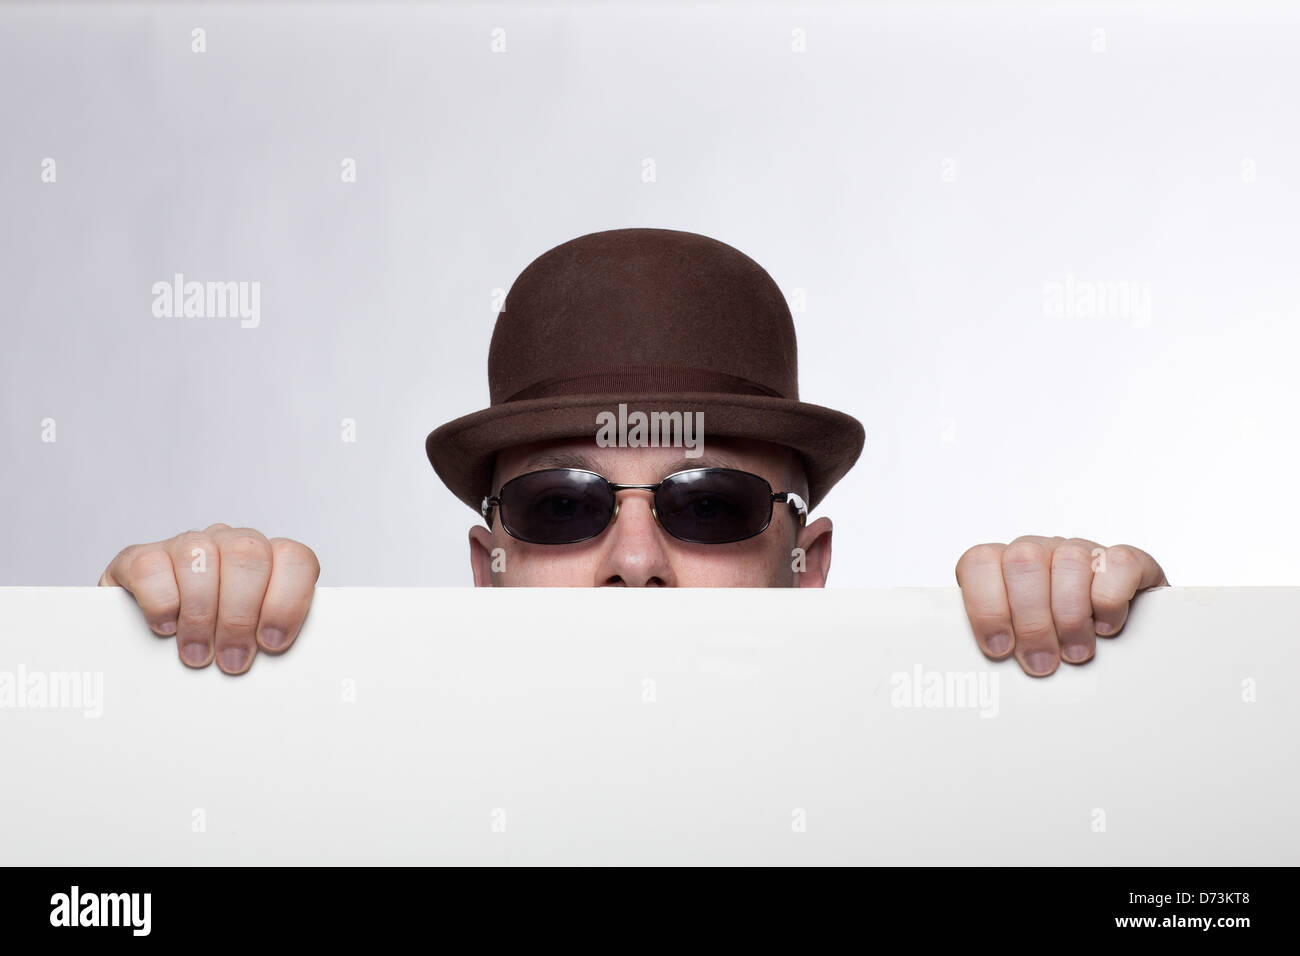 hat, hands, brown, sunglasses, surprise, bald, white wall Stock Photo